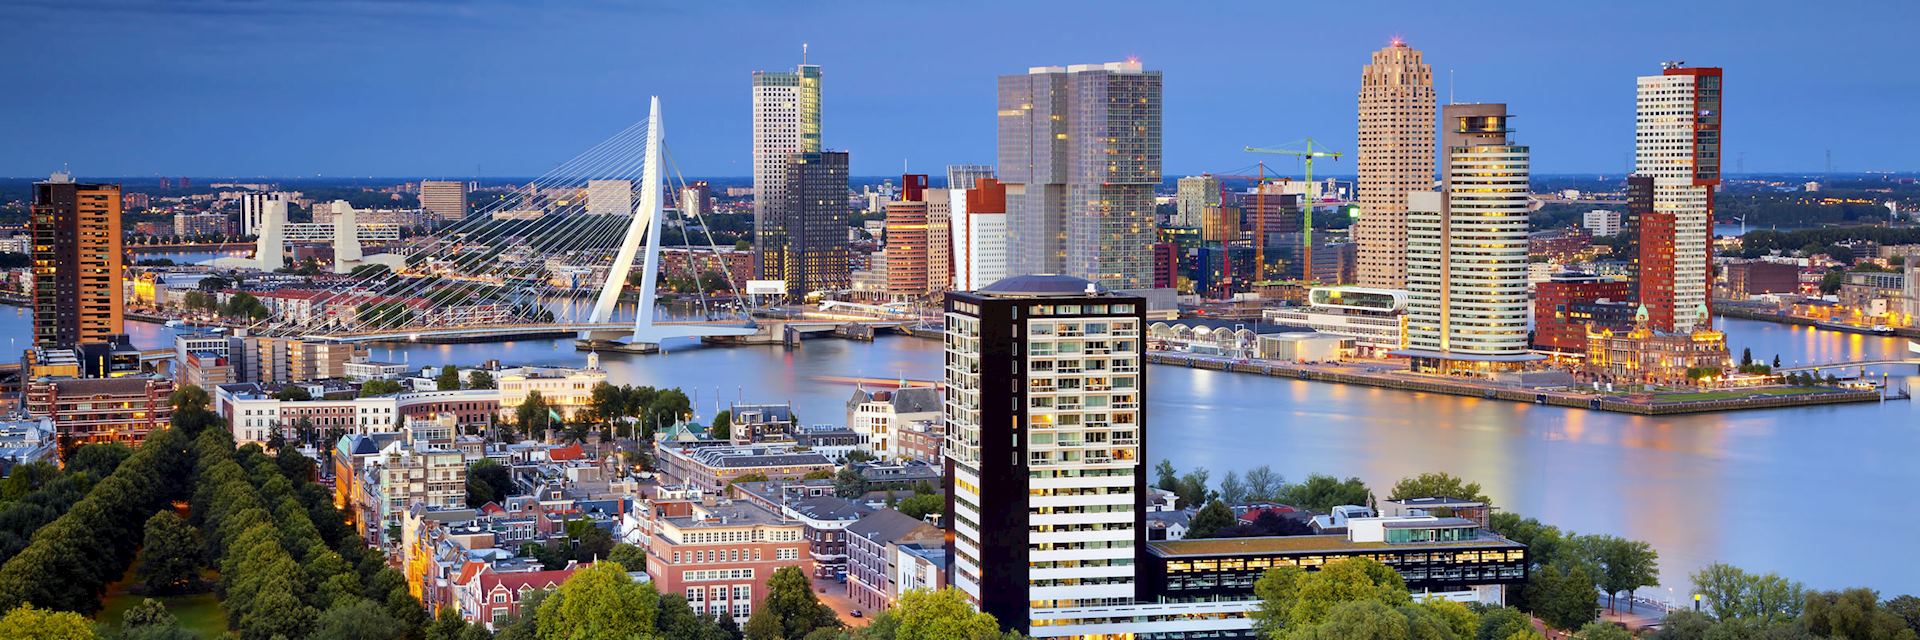 Visit Rotterdam On A Trip To The Netherlands Audley Travel Uk